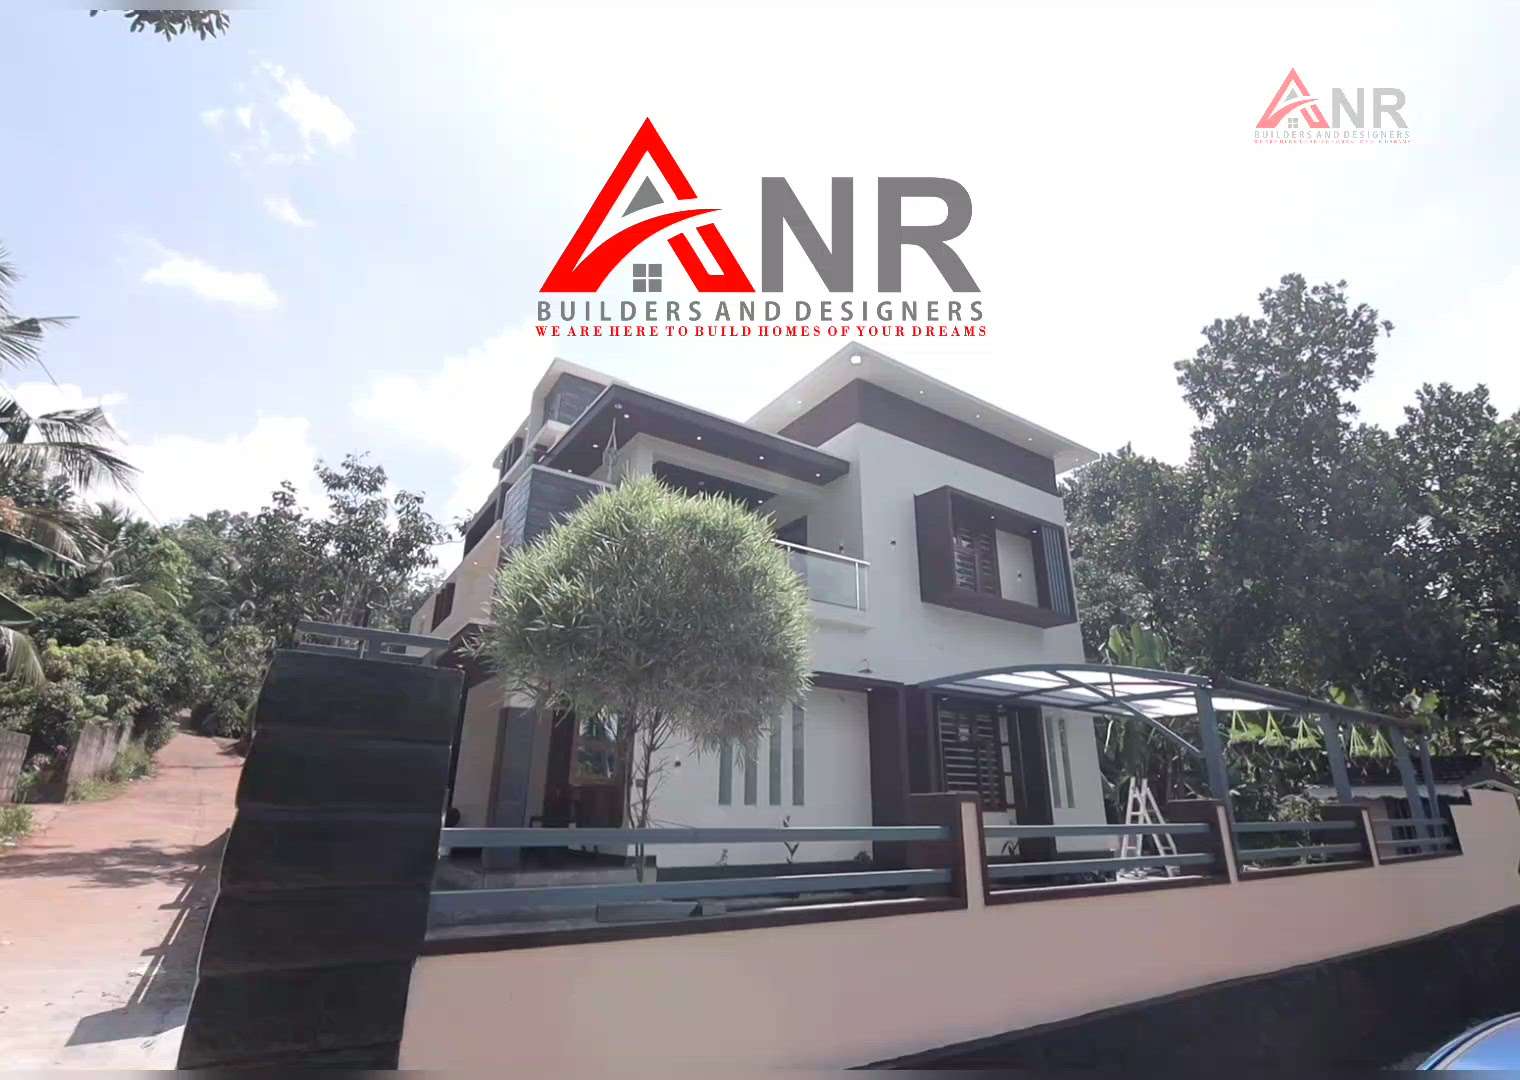 Completed project🏡

Proud Owner : Abin G Biju
Thanks to Our Client Abin G Biju And Family
for the Opportunity and trust ♥️
Area : 1250Sqft
Plot Area : 5 Cent
Location : Vaykkal, Ayoor
Designed by : @anandhu_nath.r
Contact : 9048199790, 9072057842
www.anrbuilders.in
anrbuilders2021@gmail.com

#keralahomeplanners #architecture #keralahomestyle #architecturelovers #home #dreamhome #kerala #construction #interiordesign #modernhomedesign  #KeralaStyleHouse  #Kollam #veed  #koloapp